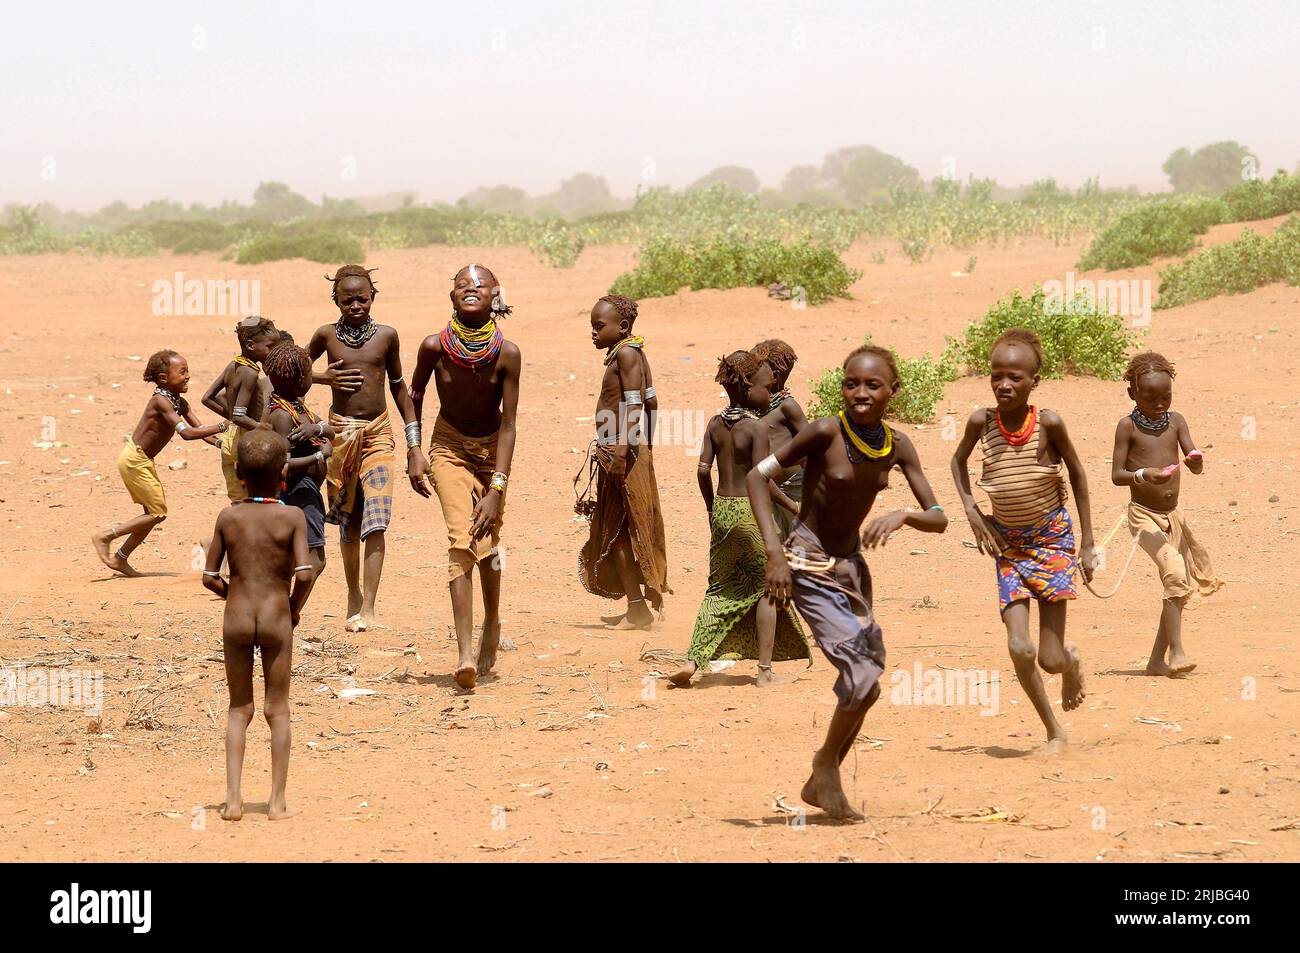 Boys and girls daasanech playing in the middle of a sandstorm. Debub Omo Zone, Ethiopia. Stock Photo